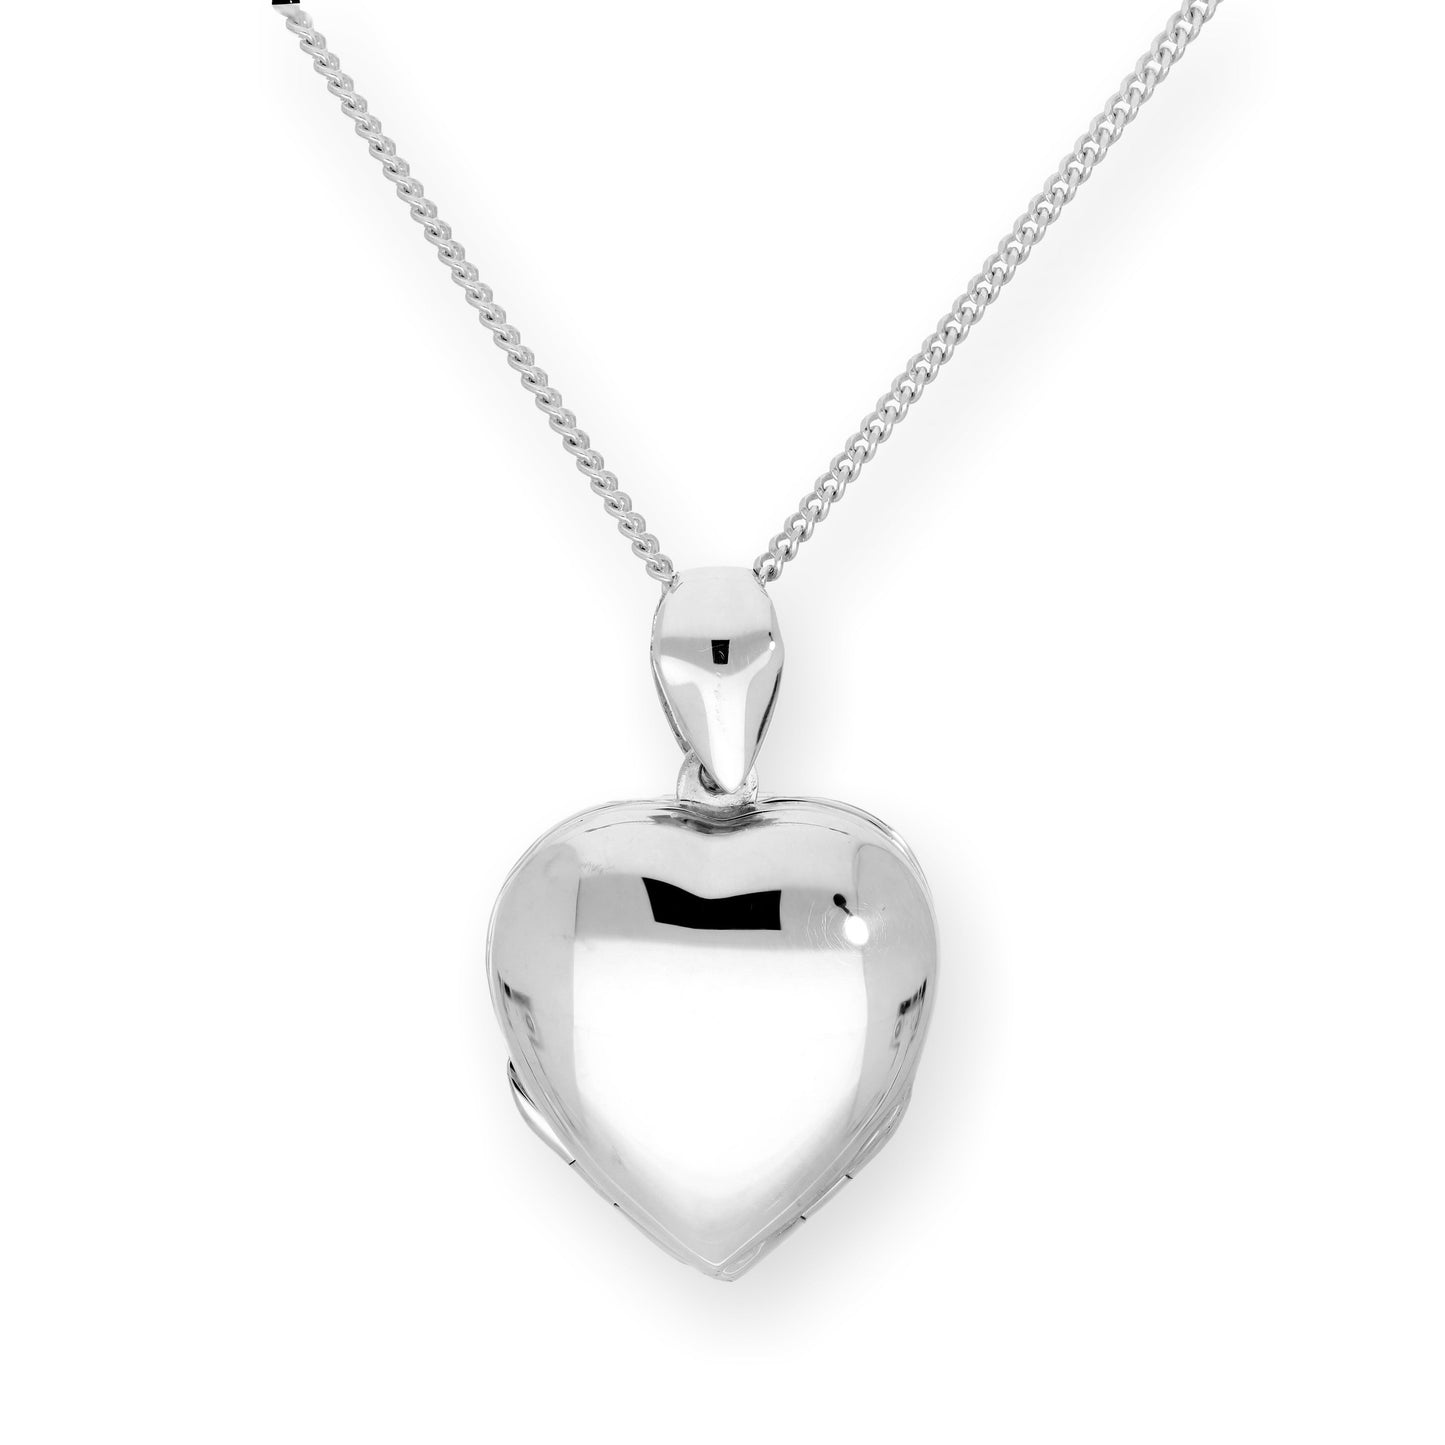 Sterling Silver 4 Photo Engravable Heart Family Locket on Chain 16 - 24 Inches